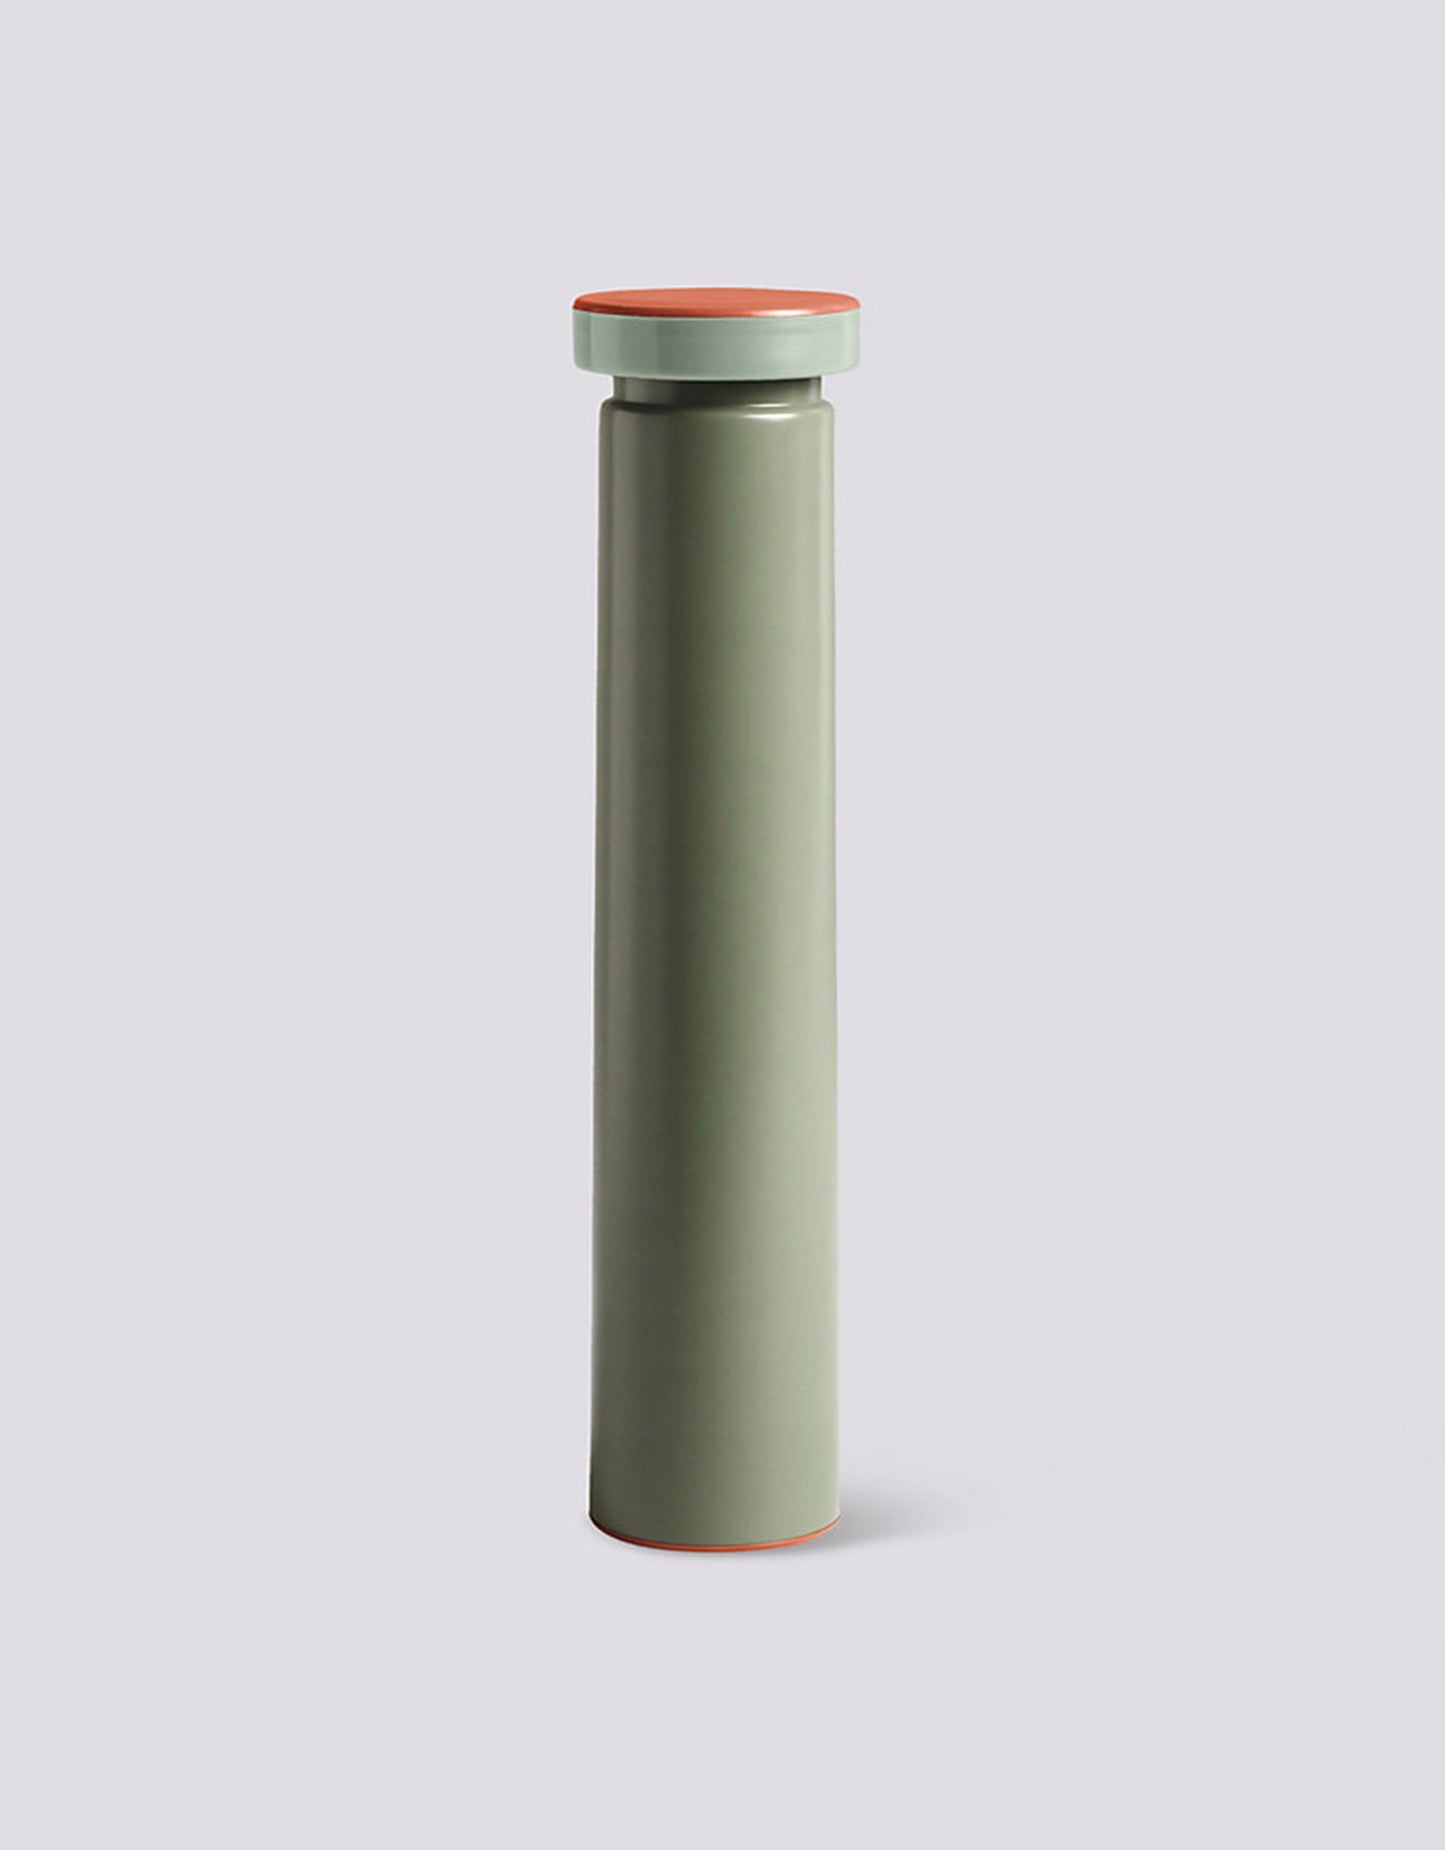 Sowden Salt & Pepper Shaker in green from HAY brand. Available at Easy Tiger Goods Toronto.